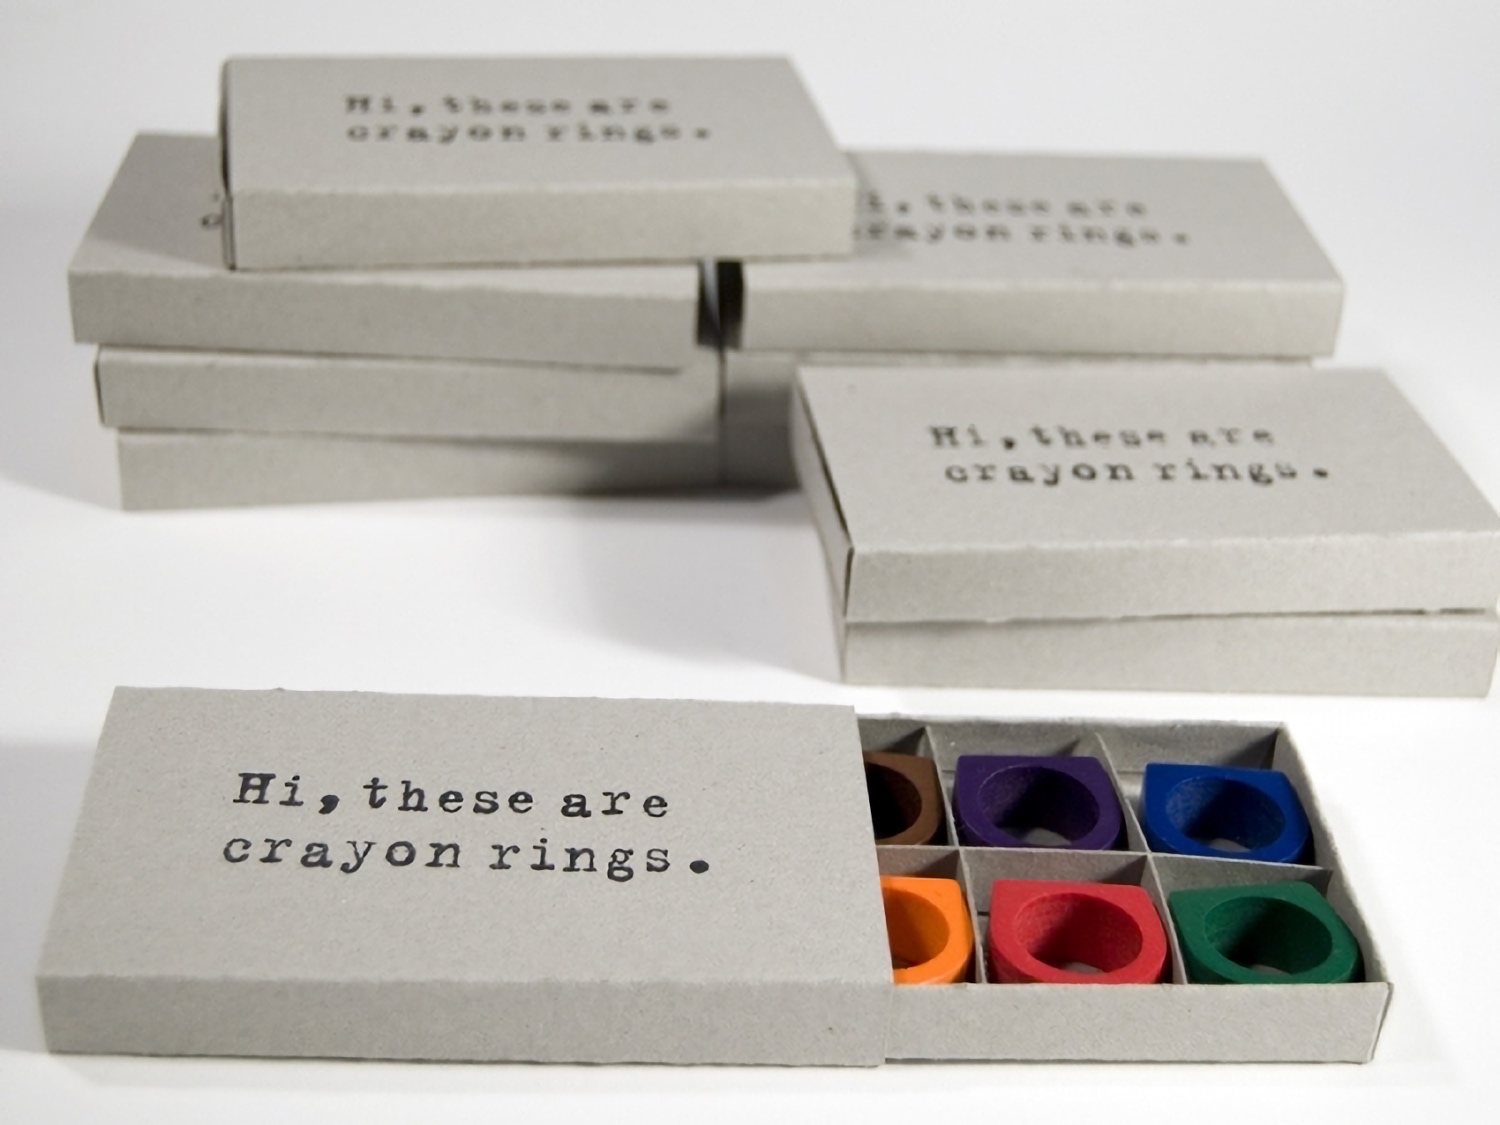 Crayon Rings by Timothy Liles